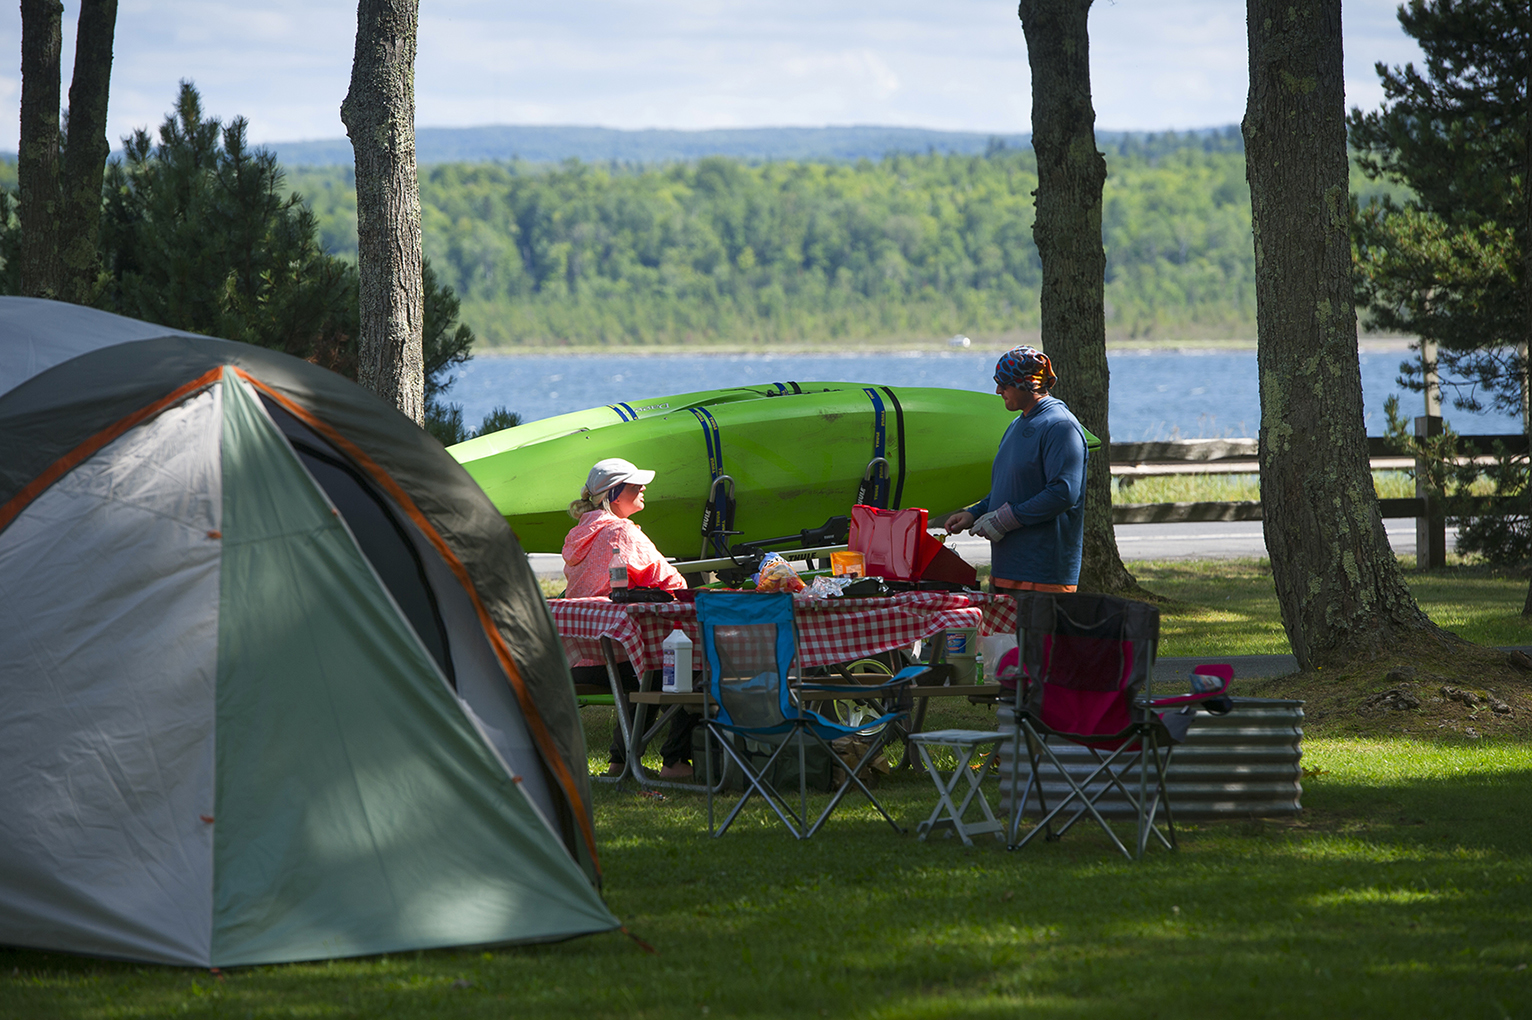 Camping is an important recreation activity in Michigan, with more than 100 state parks.